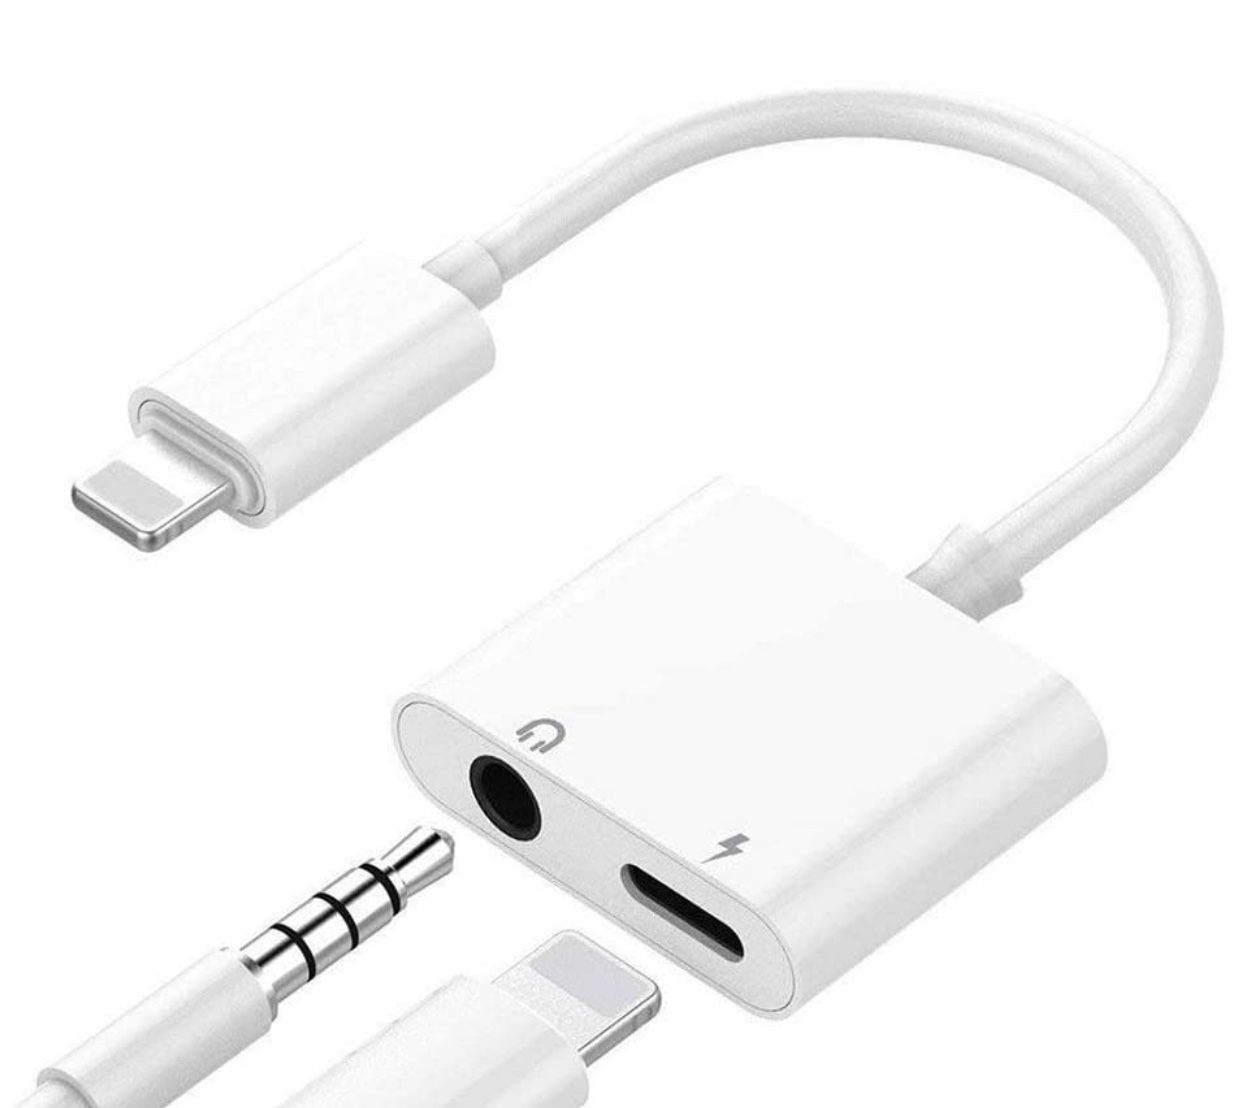 iPhone Headphone Adapter & Splitter, 2 in 1 Lightning to 3.5mm Headphone Audio & Charger Compatible for iPhone 11/XS/XR/X 8 7/iPad/iPod, Support Call